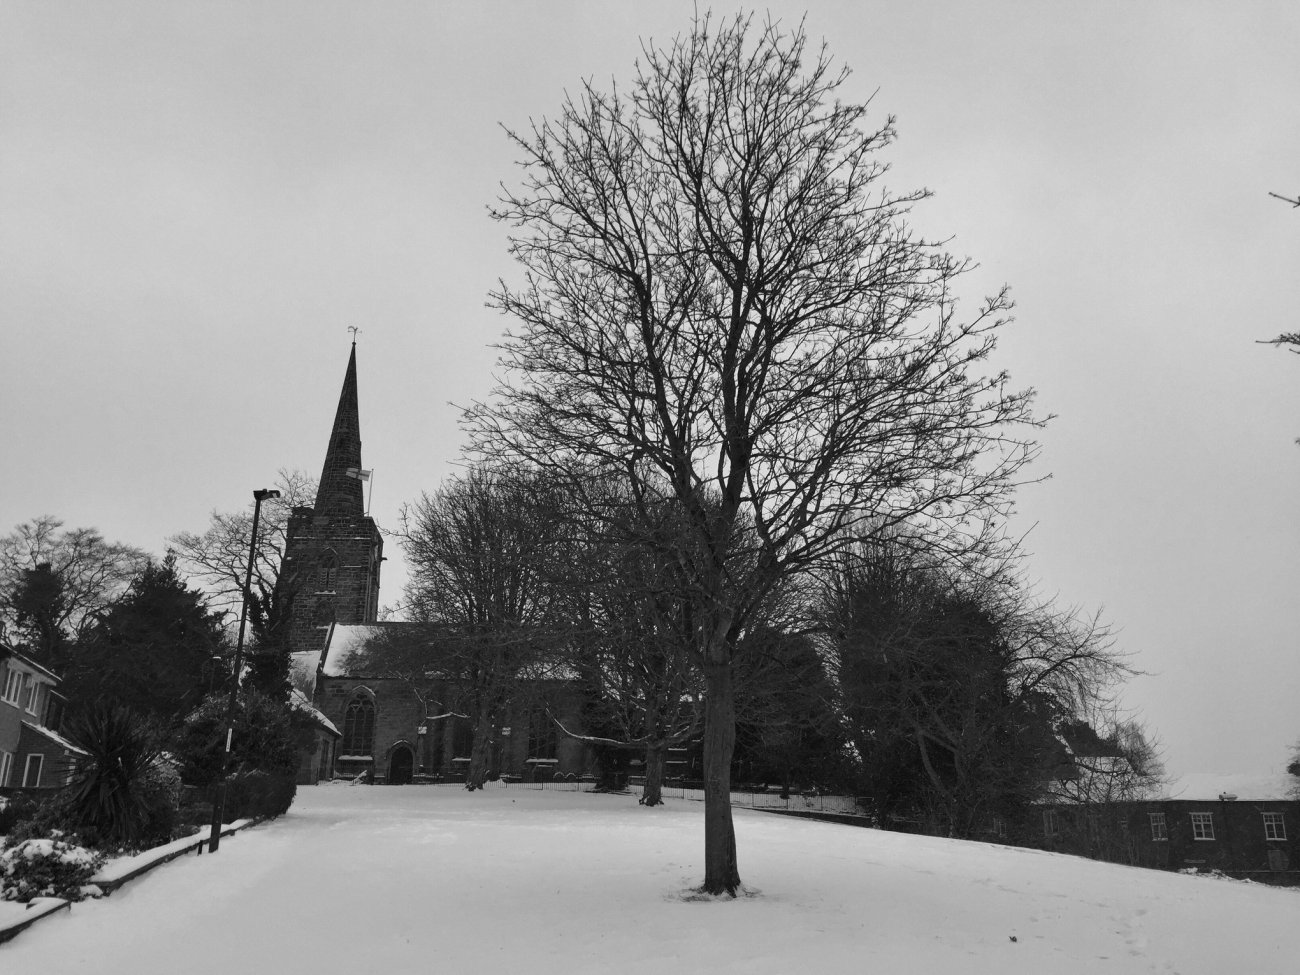 Photograph of St Werburgh's in the snow, 2018